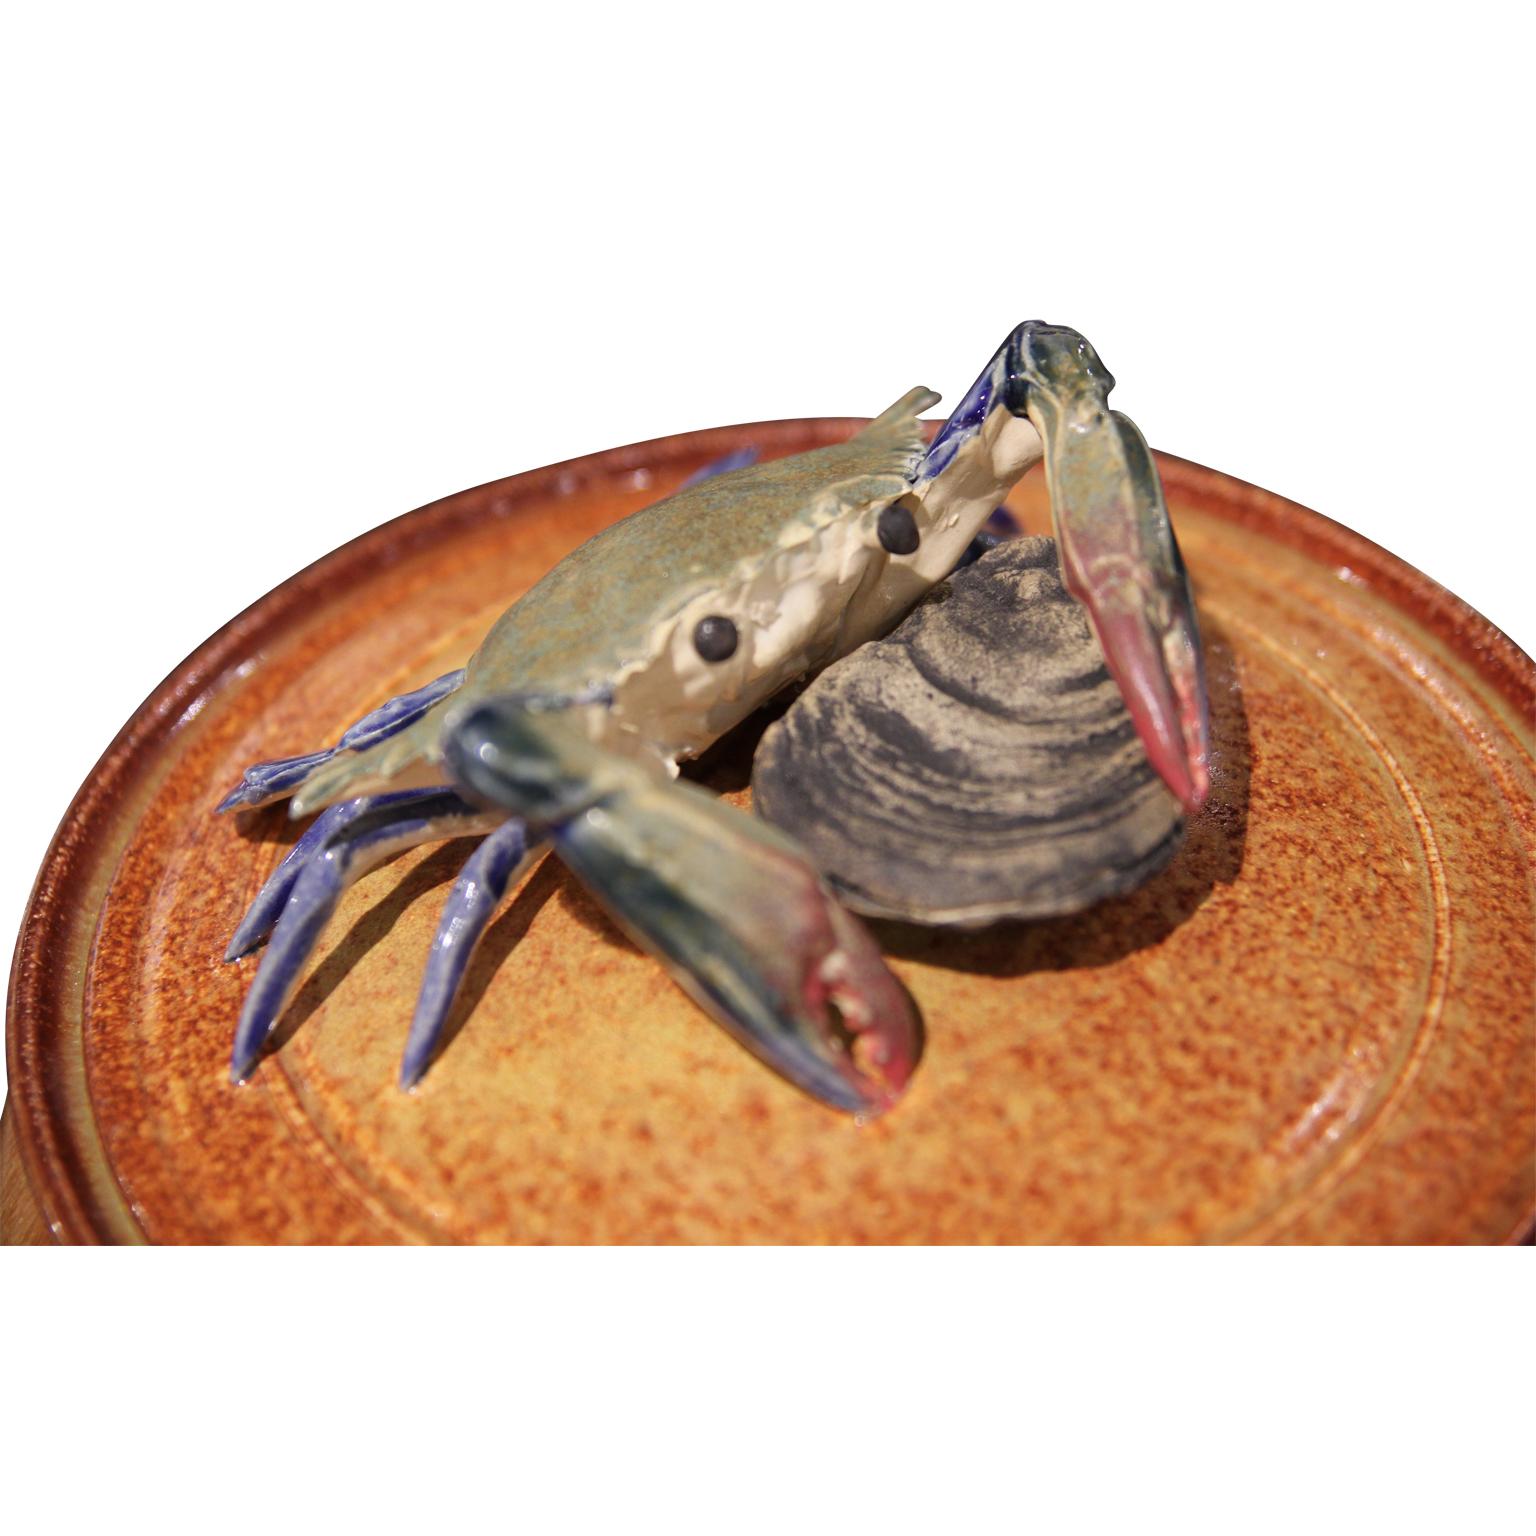 Josie Gautier (1899-1992), owner of Singing River Originals in Gautier, created ceramic pottery with local themes. Her crabs and other Gulf Coast inspired creations of flora and fauna were famous and her business became a tourist attraction.